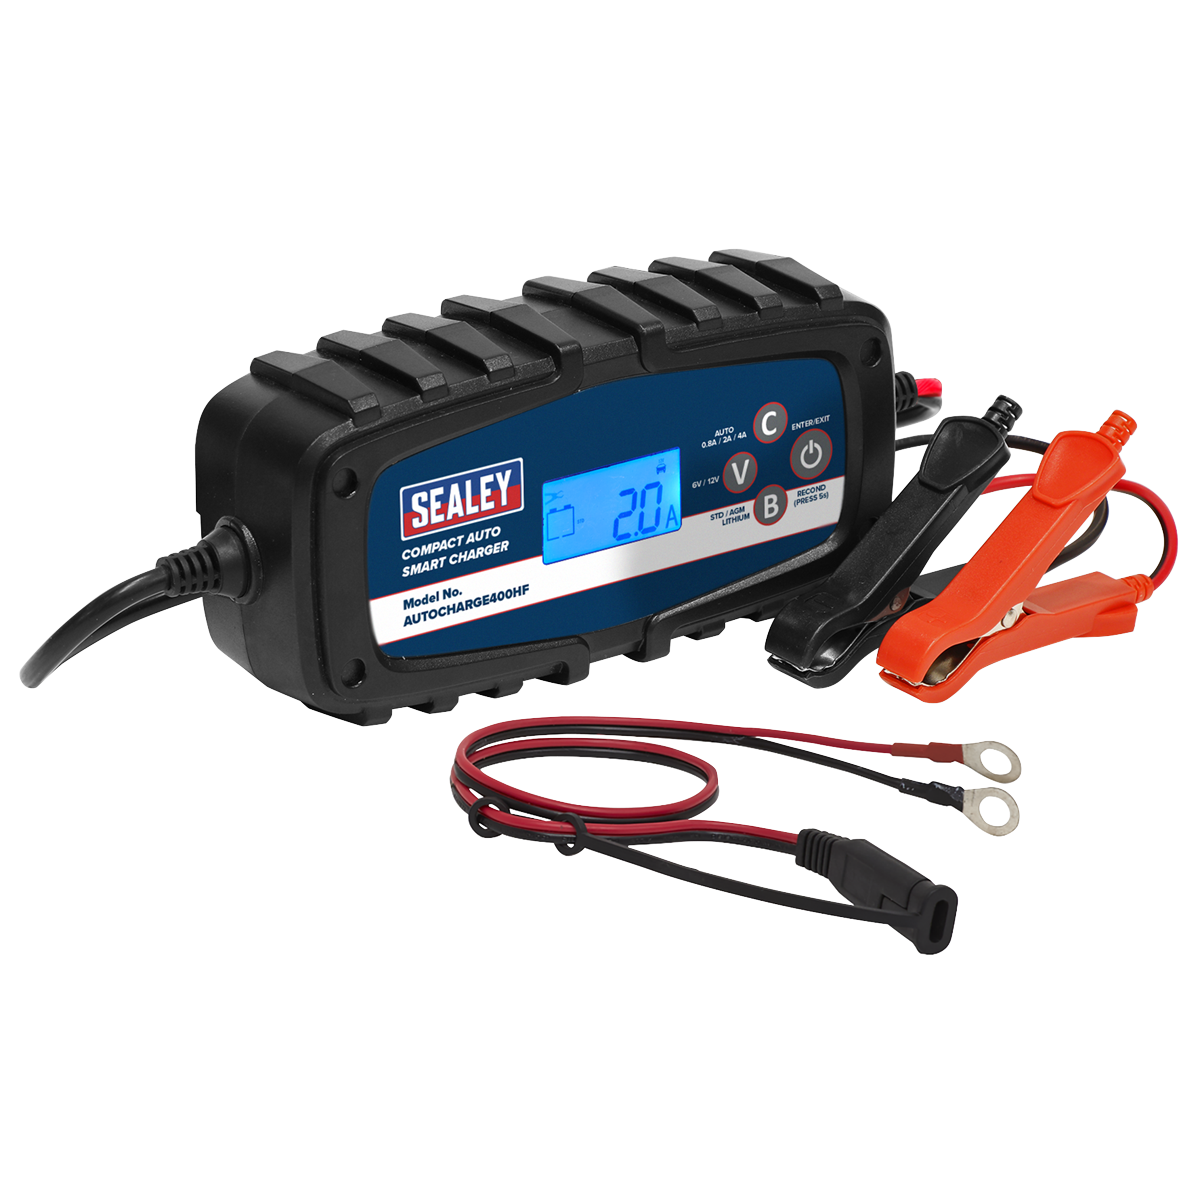 Compact Auto Smart Charger & Maintainer 4A 6/12V - AUTOCHARGE400HF - Farming Parts